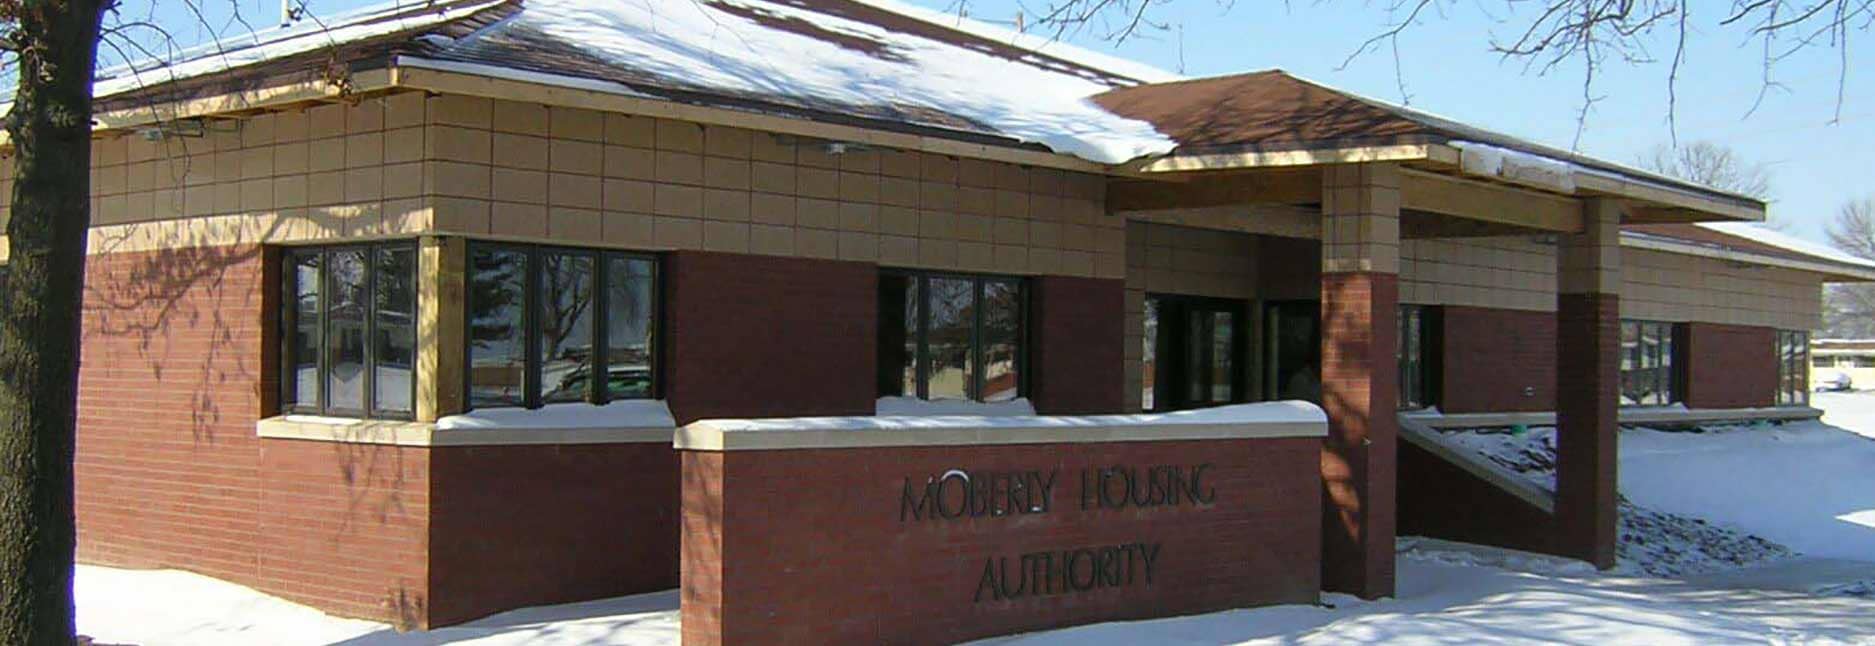 Moberly-Housing-Authority